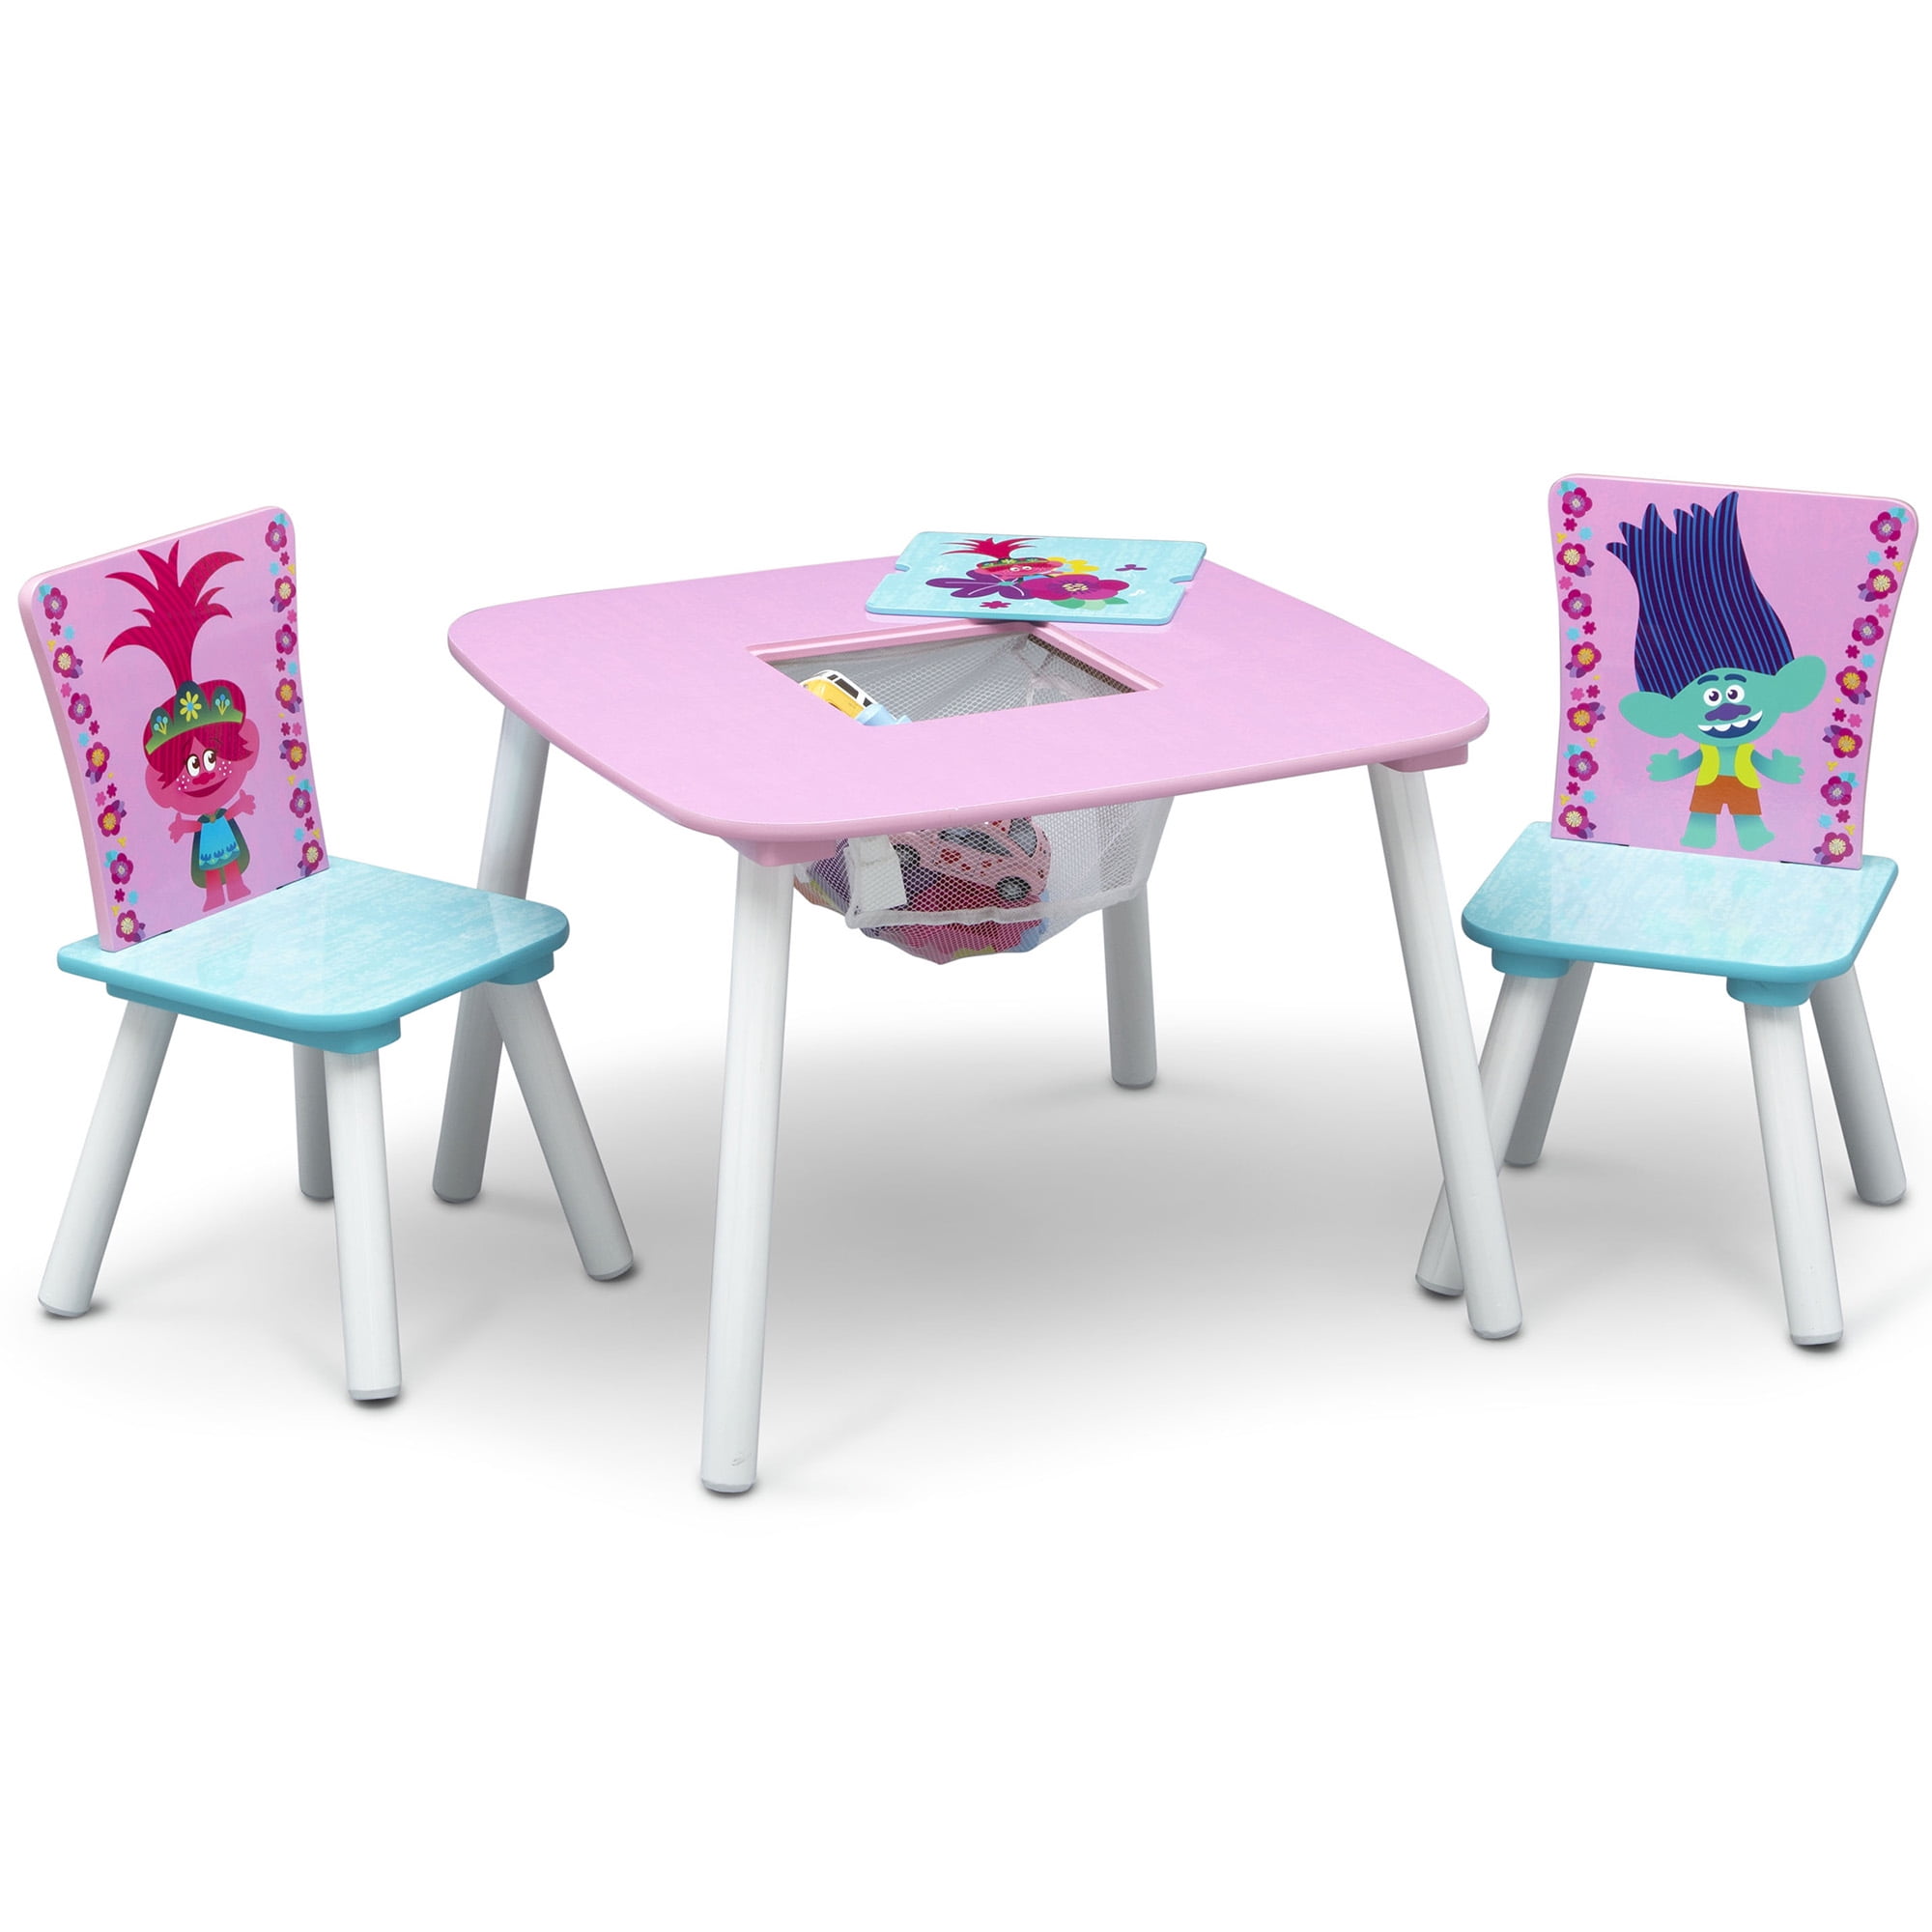 Trolls Kids School Table Desk And Chair With Storage Bin Box Set For Girls Pink 